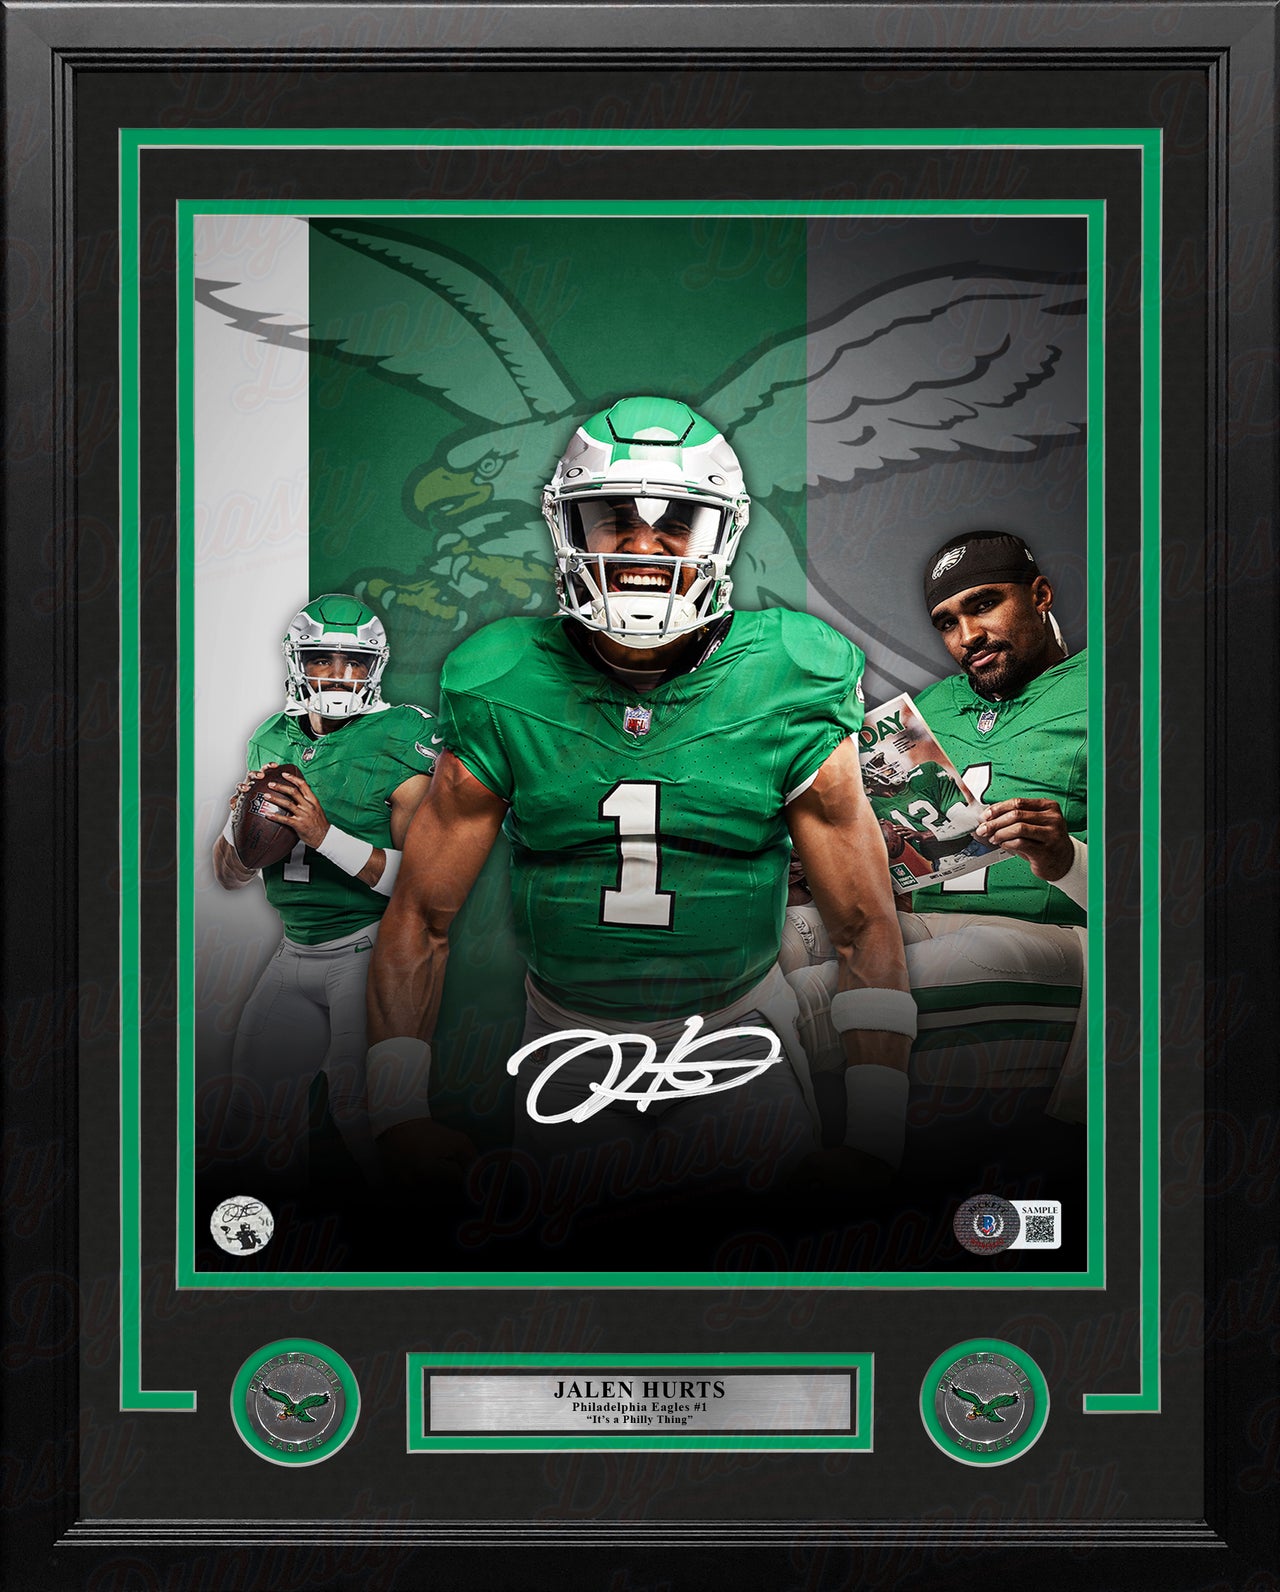 Jalen Hurts Philadelphia Eagles Autographed 11" x 14" Framed Kelly Green Collage Football Photo